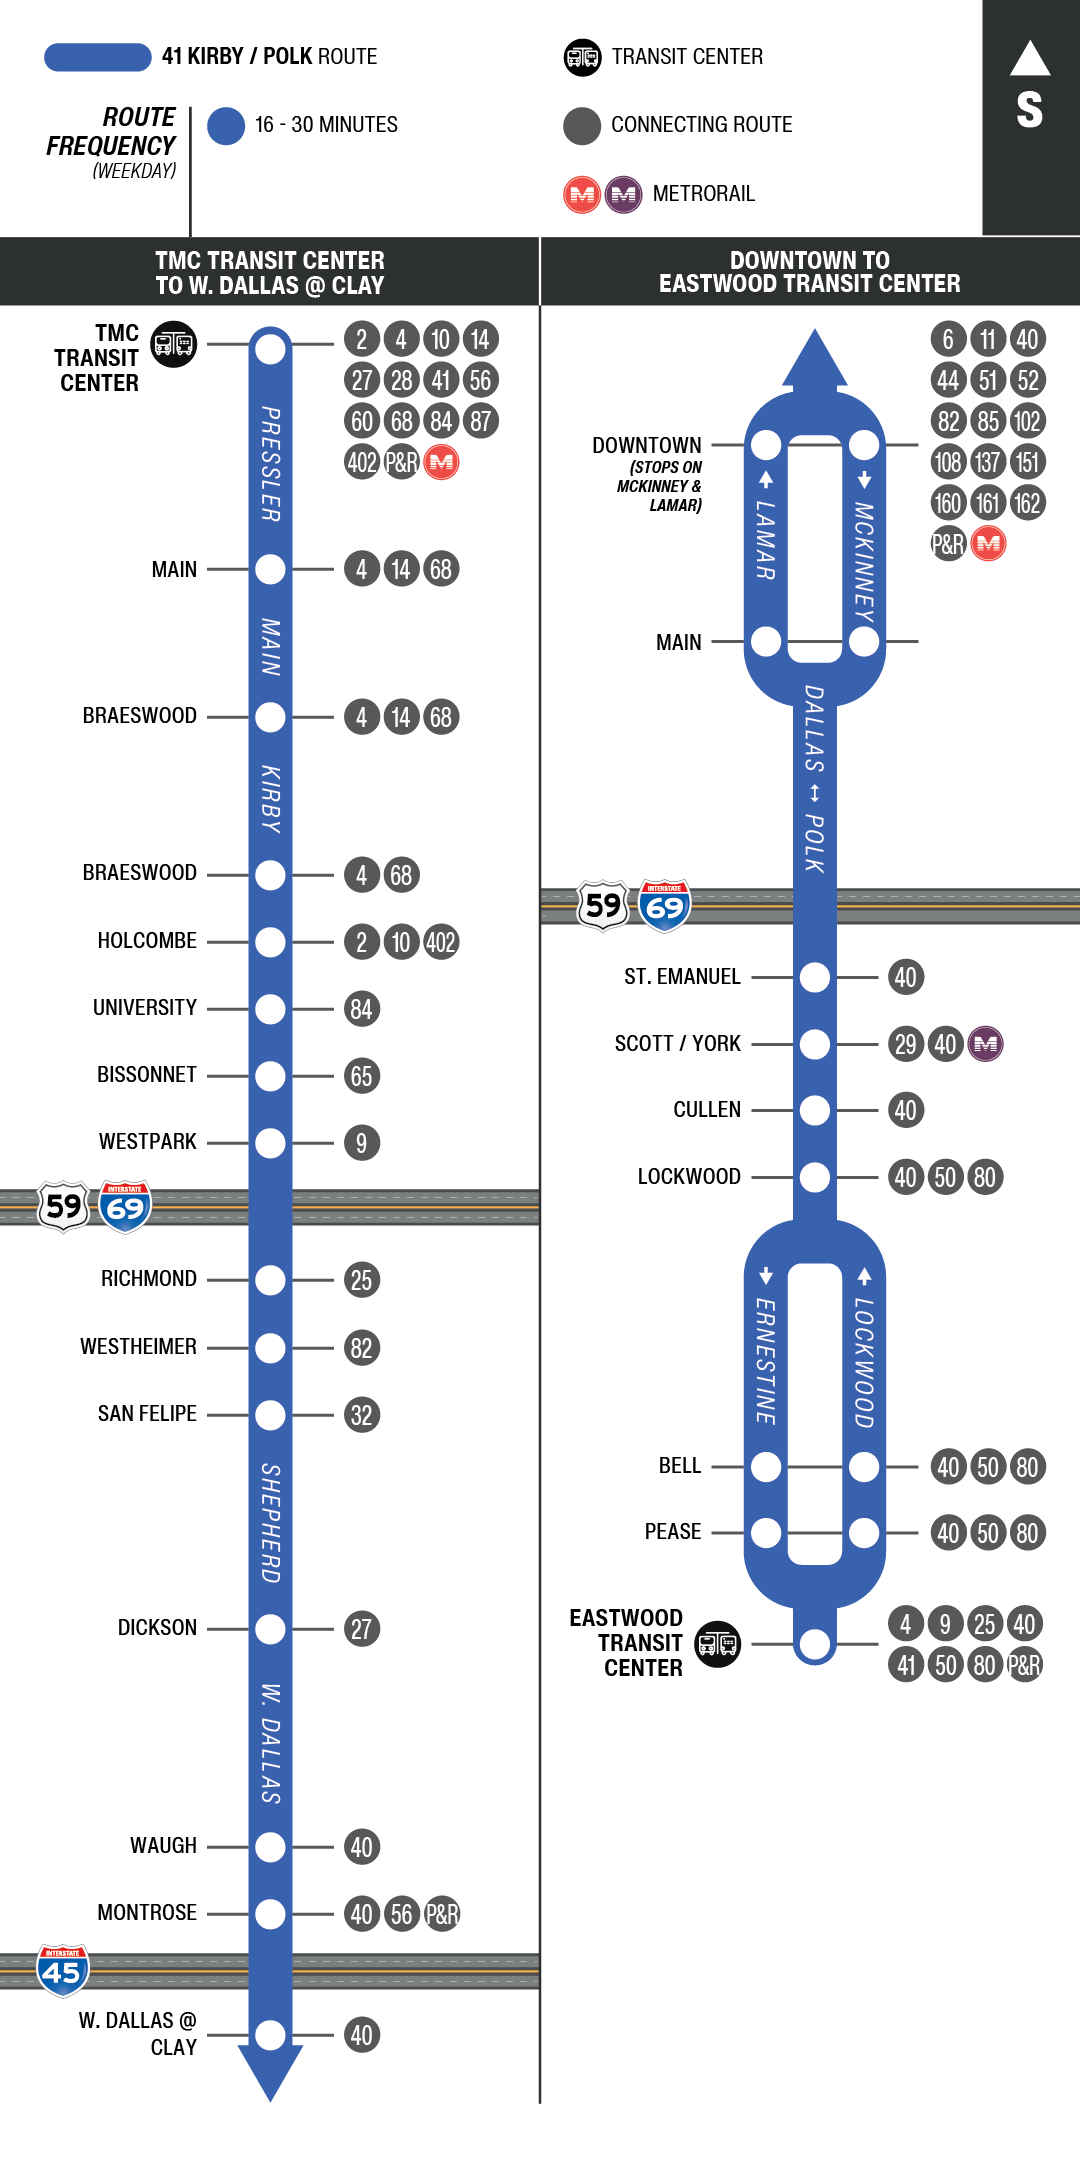 Route map for 41 Kirby / Polk bus